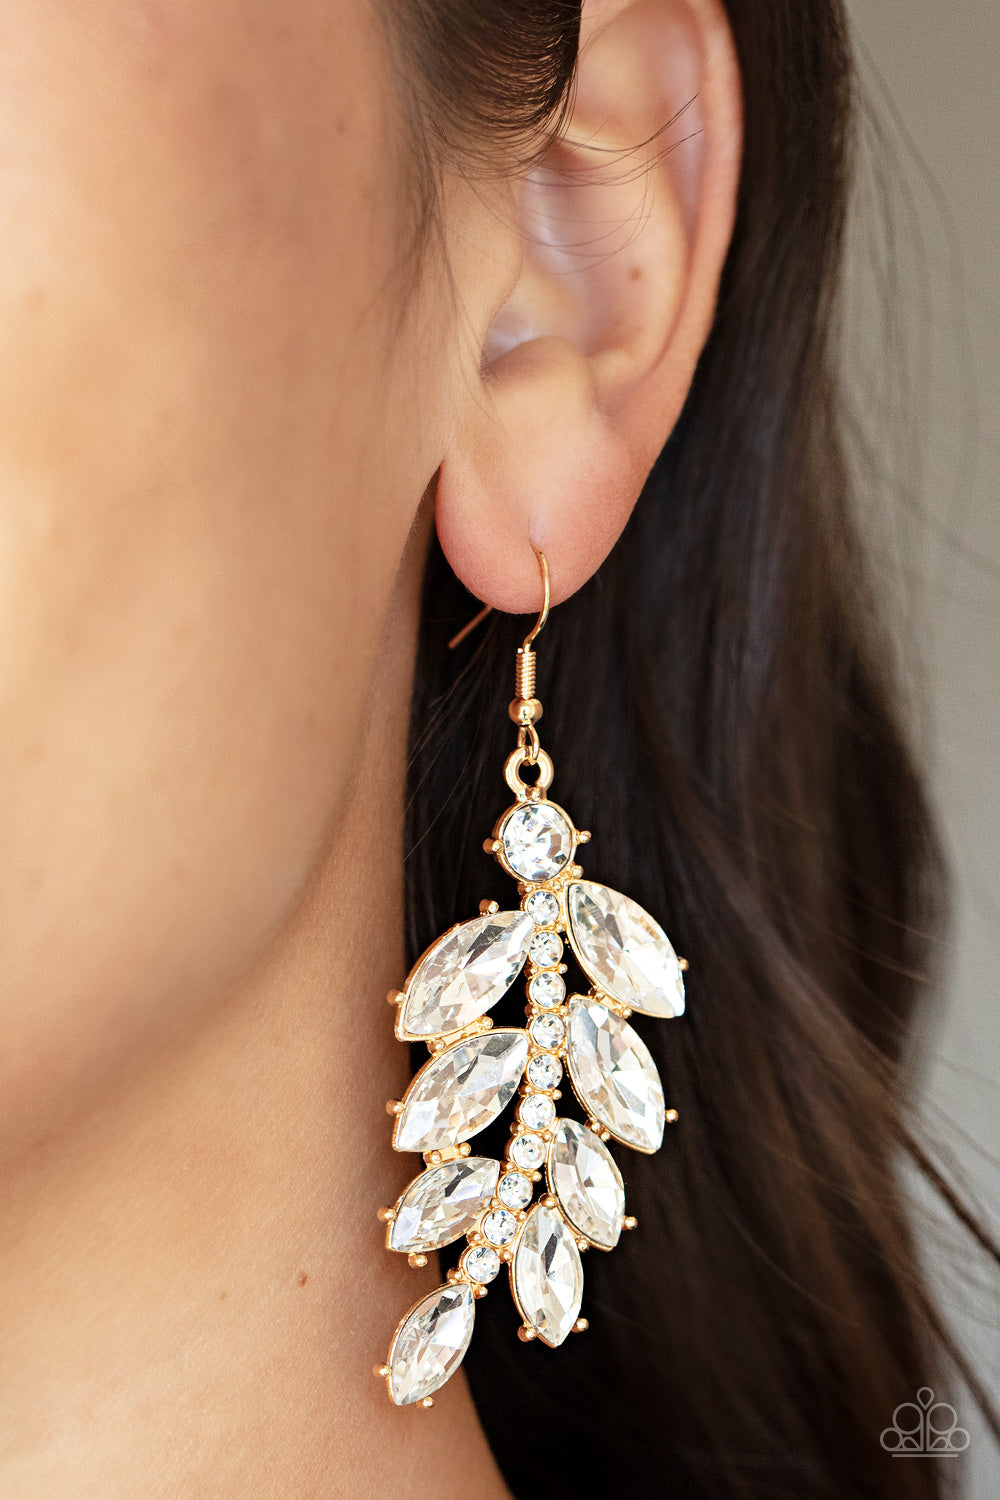 Ice Garden Gala - Gold Rhinestone Earrings versized marquise cut white rhinestones fan out from a curved gold bar encrusted in glassy white rhinestones, resulting into a glamorously leafy statement piece. Earring attaches to a standard fishhook fitting.  Sold as one pair of earrings.